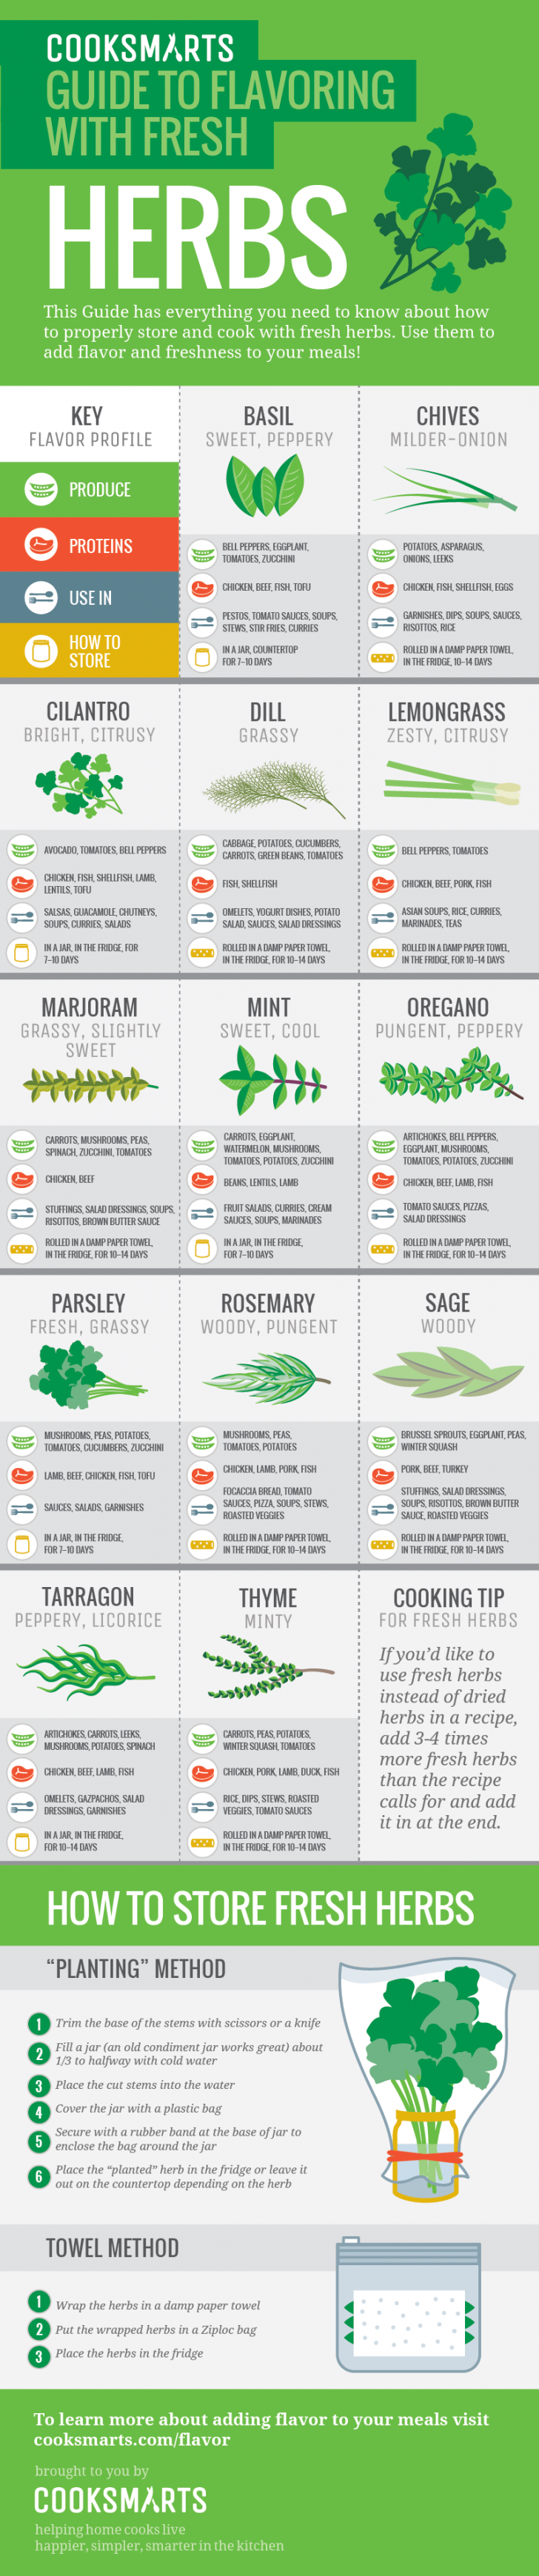 Guide to flavoring with fresh herbs